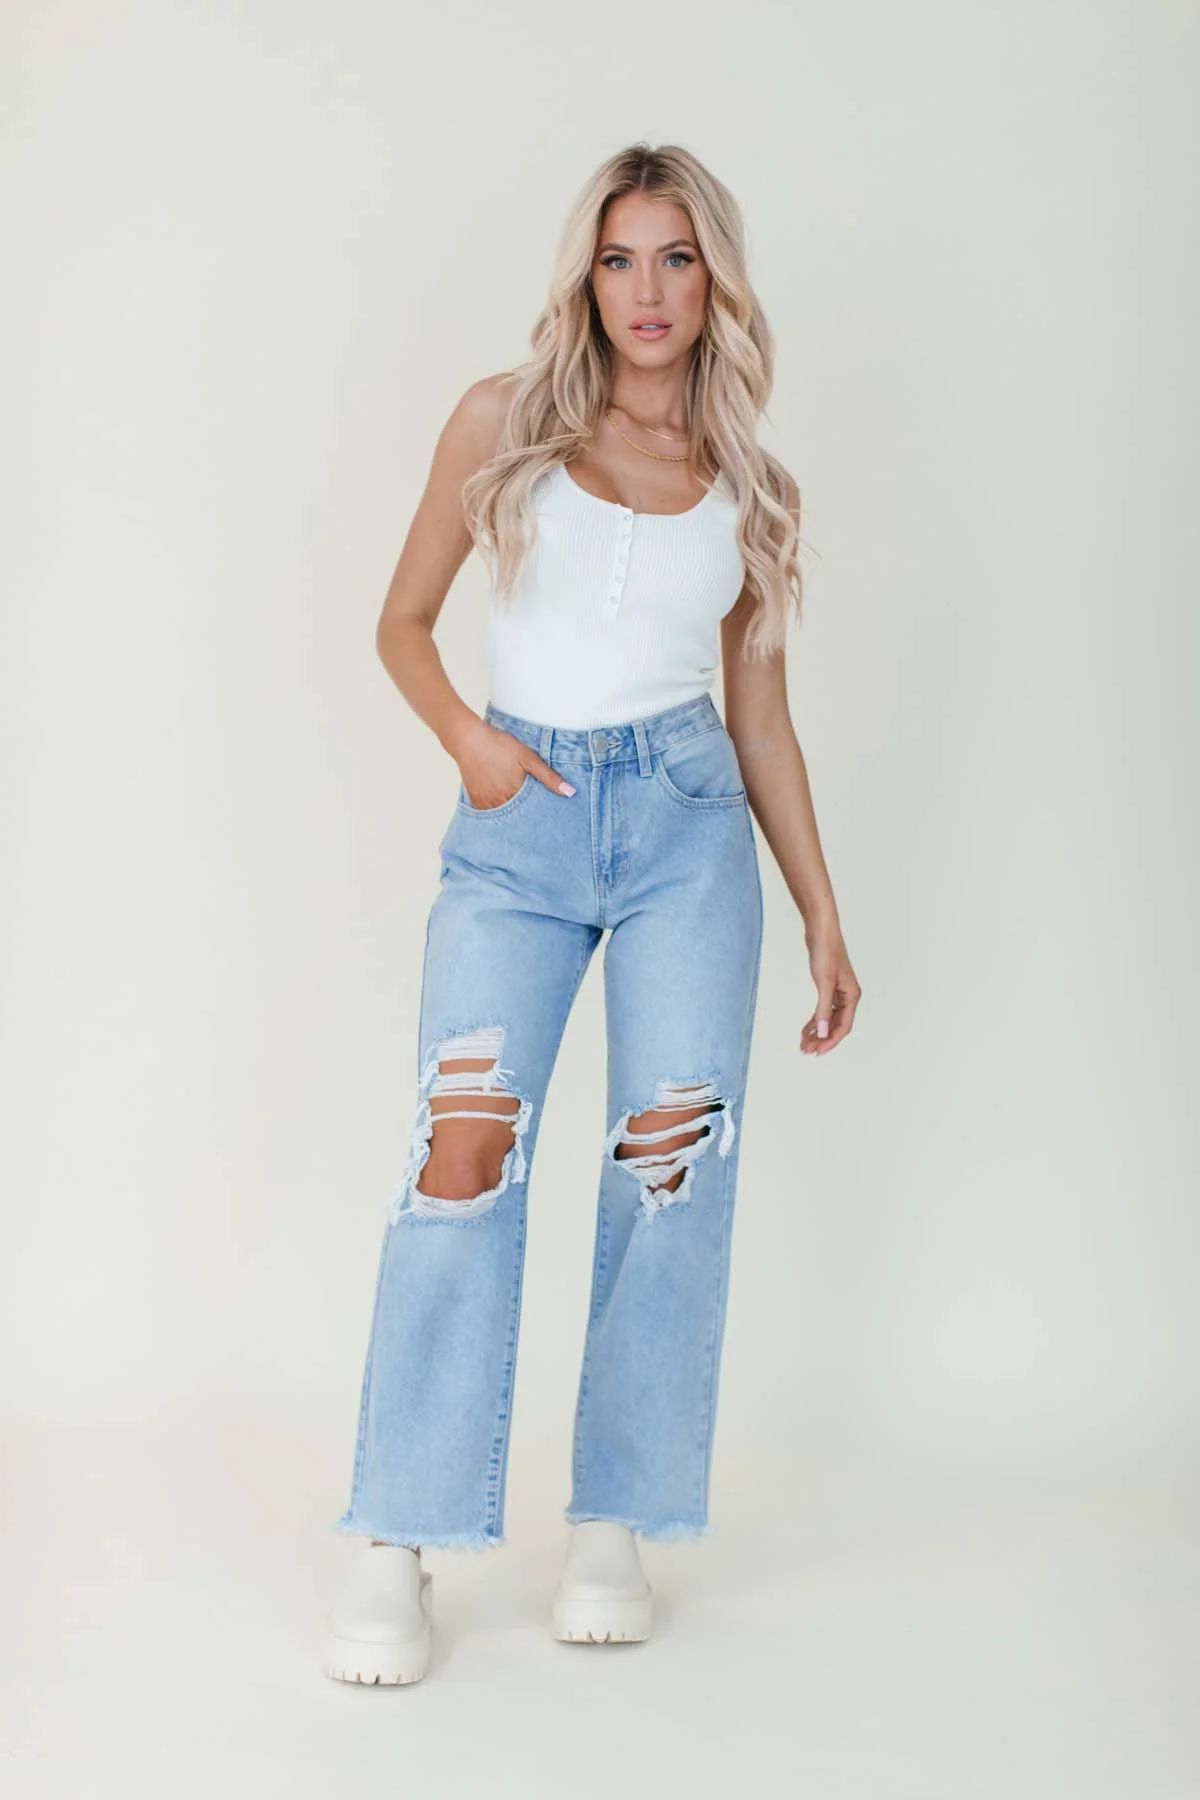 RESTOCK -  Distressed High Waist Mom Jeans - FINAL SALE | The Post